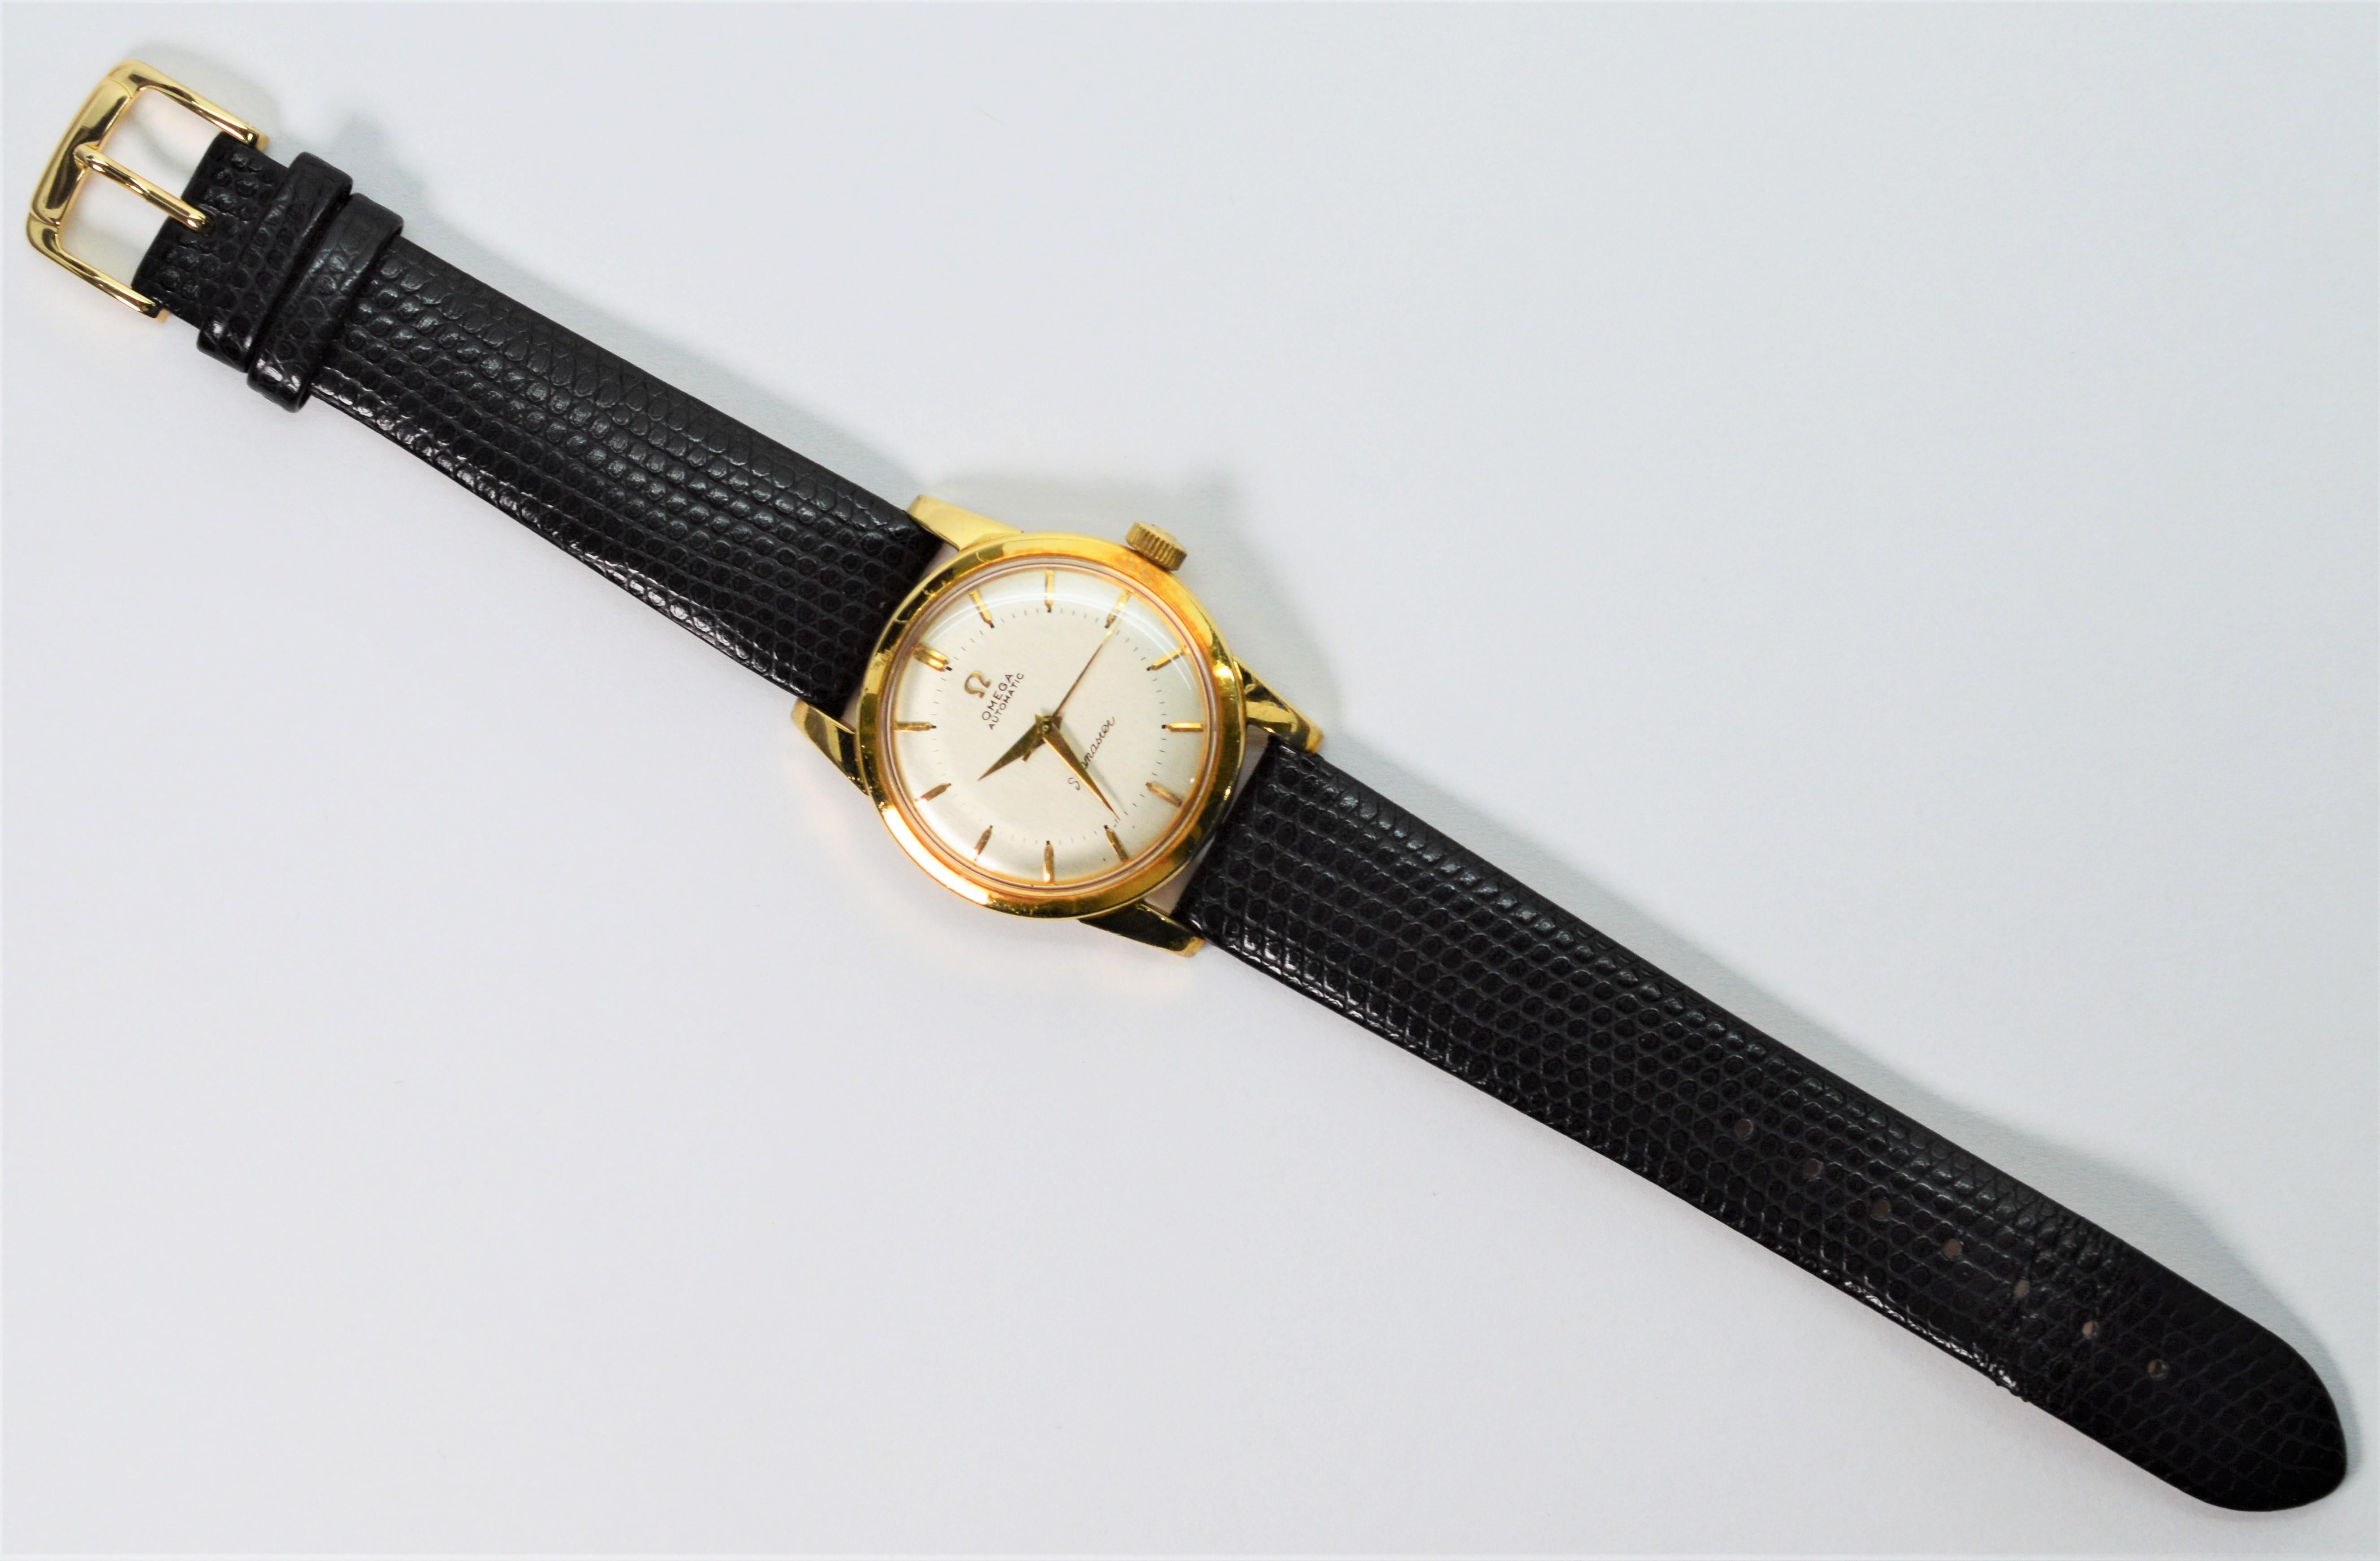 A classic collectable timepiece. Enjoy this dependable 18K yellow gold Omega 351 Men's automatic bumper wrist watch.
Set up with a new Speidel black crocodile strap, this fine 34mm gold Omega Seamaster watch number 13065932 has a silver-toned face